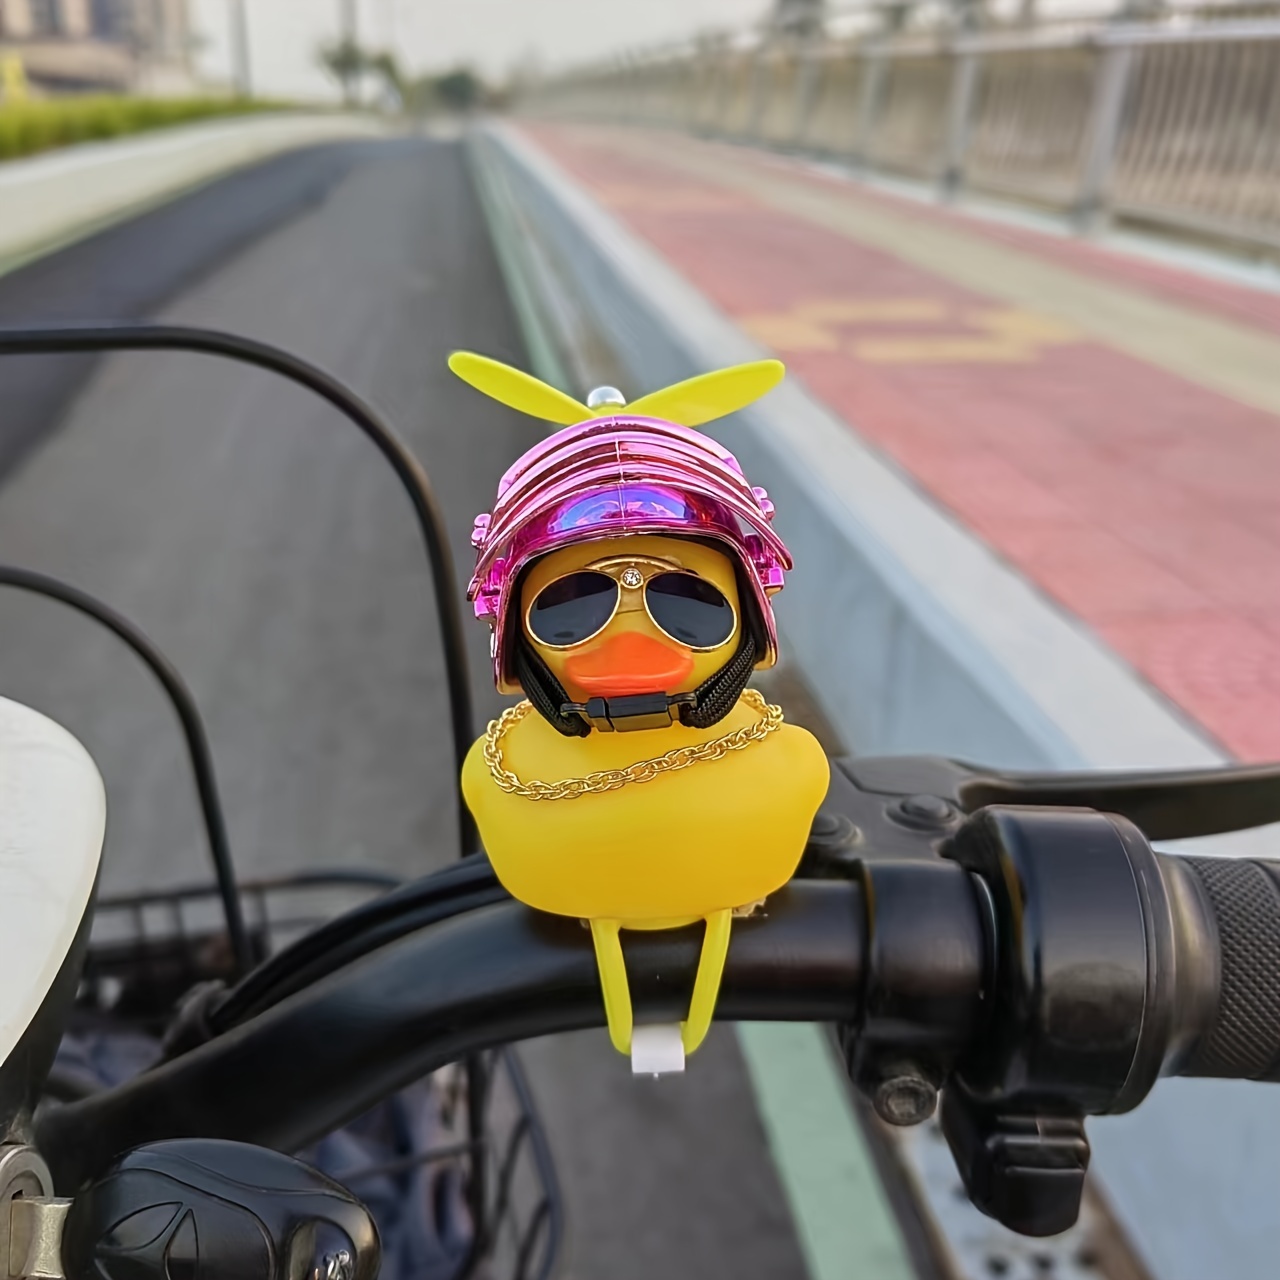 

Street Motor Scooter Handlebar Accessory, Pvc Duck Figurine With Reflective Helmet And Propeller - Universal Fit For Bike & Scooter